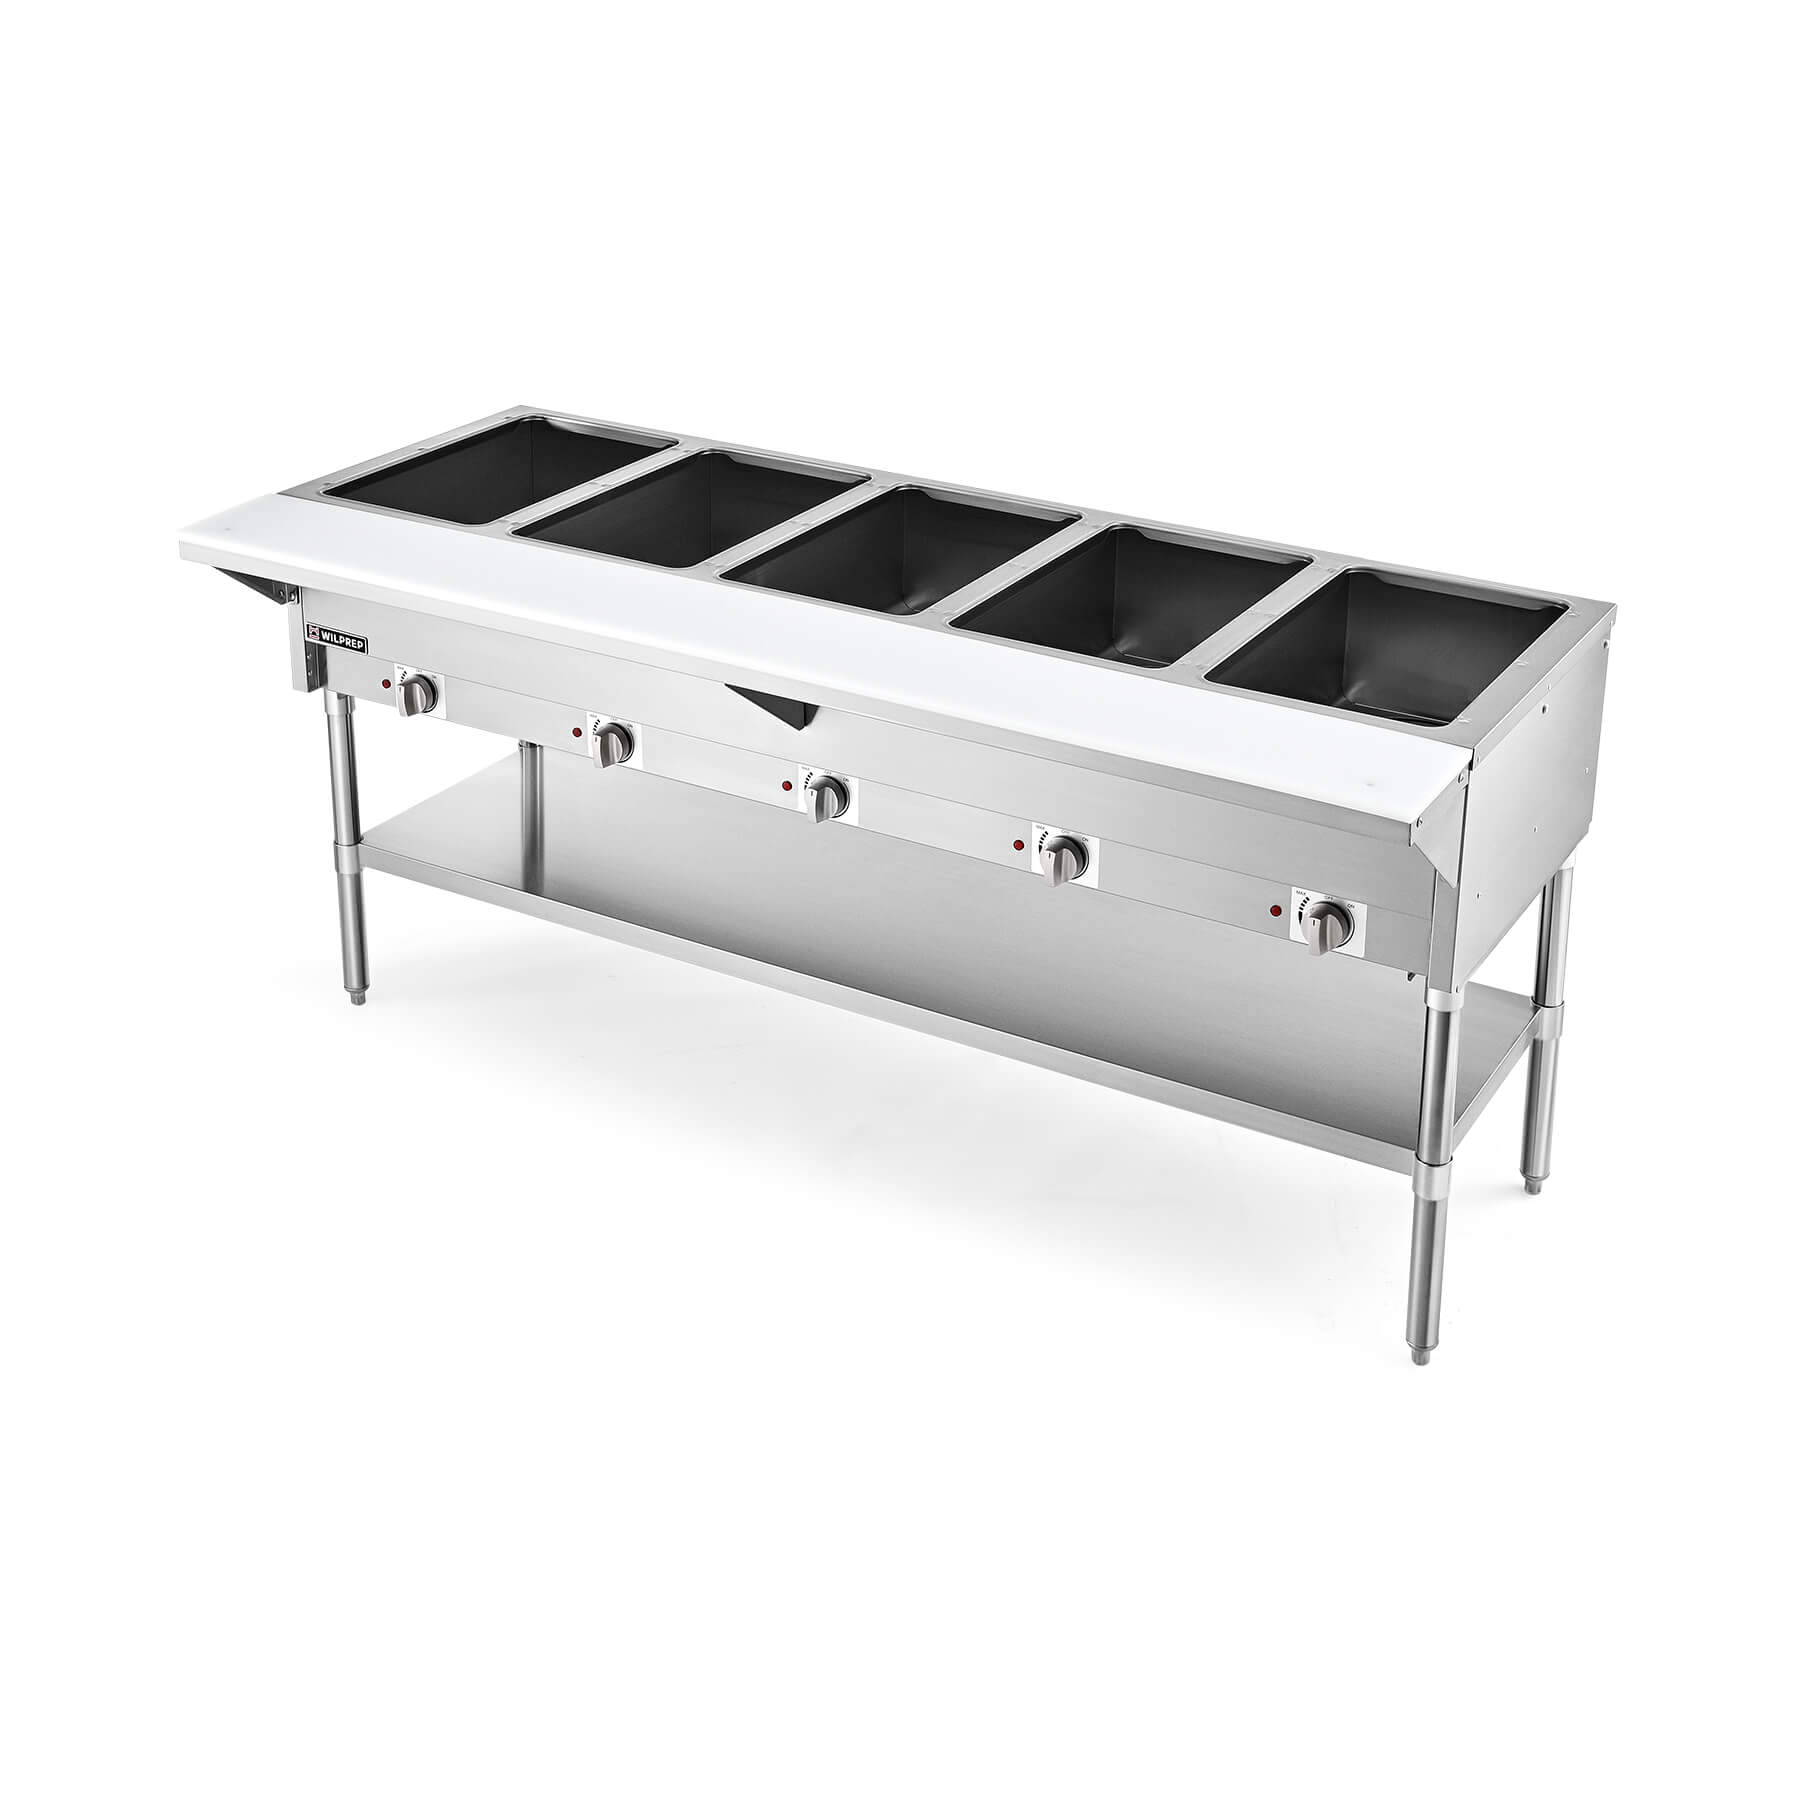 5 Well Electric Steam Table with Storage Shelf 1000W